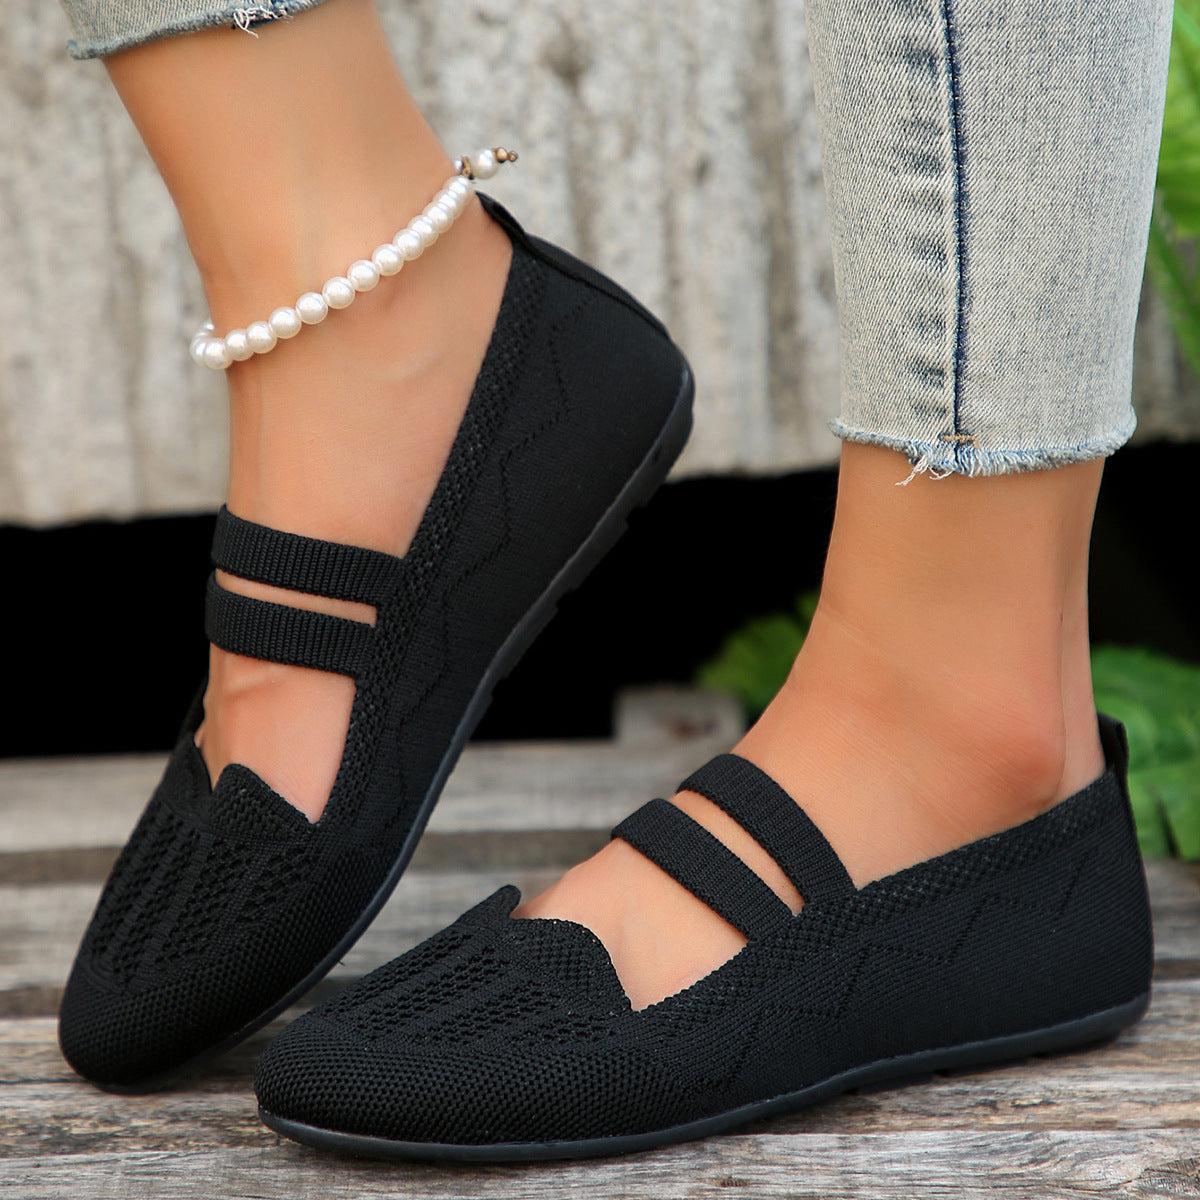 Women's Low-cut Round Toe Slip-on Knit Casual Flat Shoes